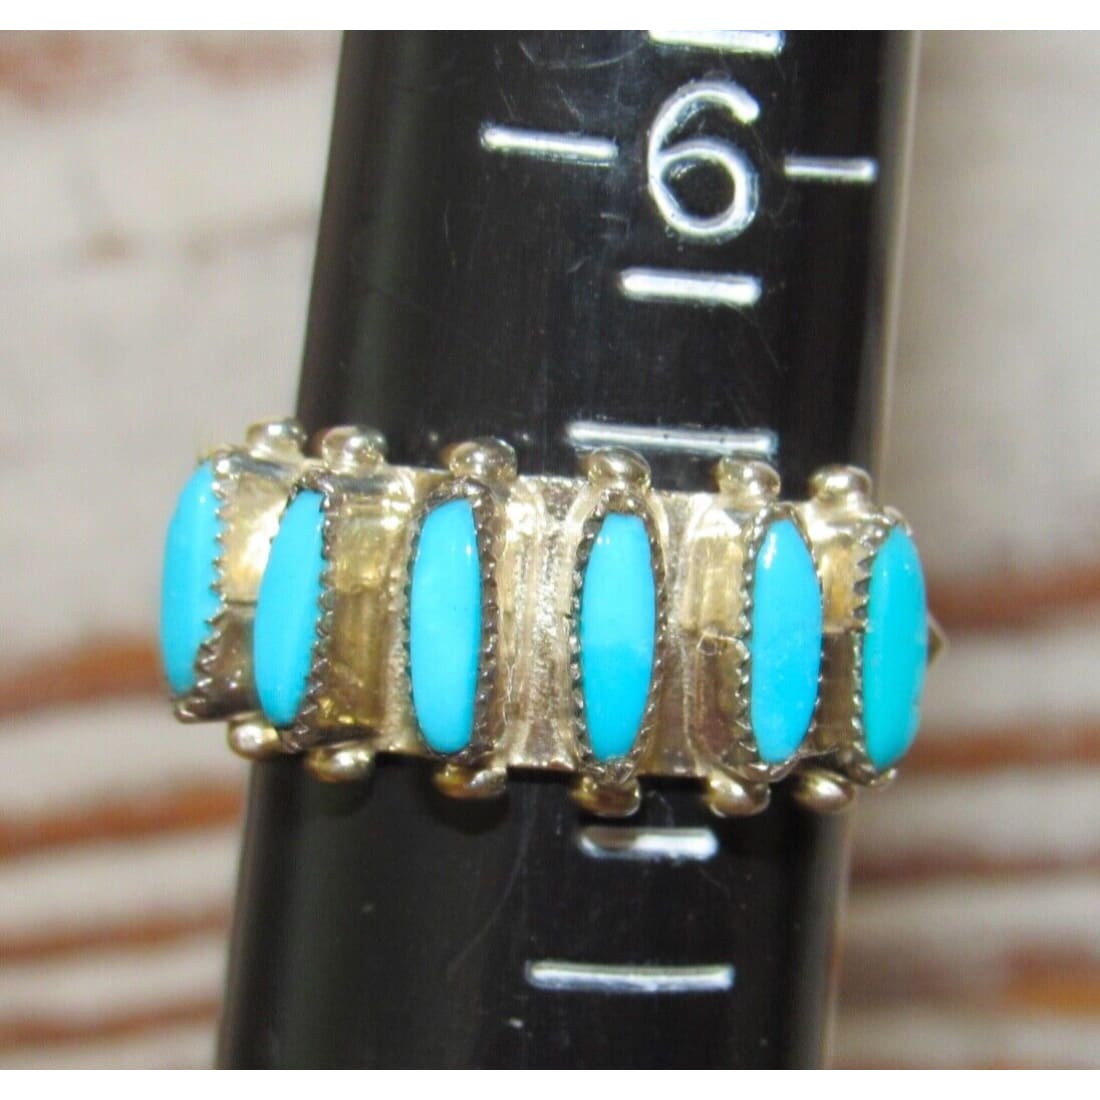 Zuni Turquoise Petite Point Ring Sz 7 Sterling Signed Native